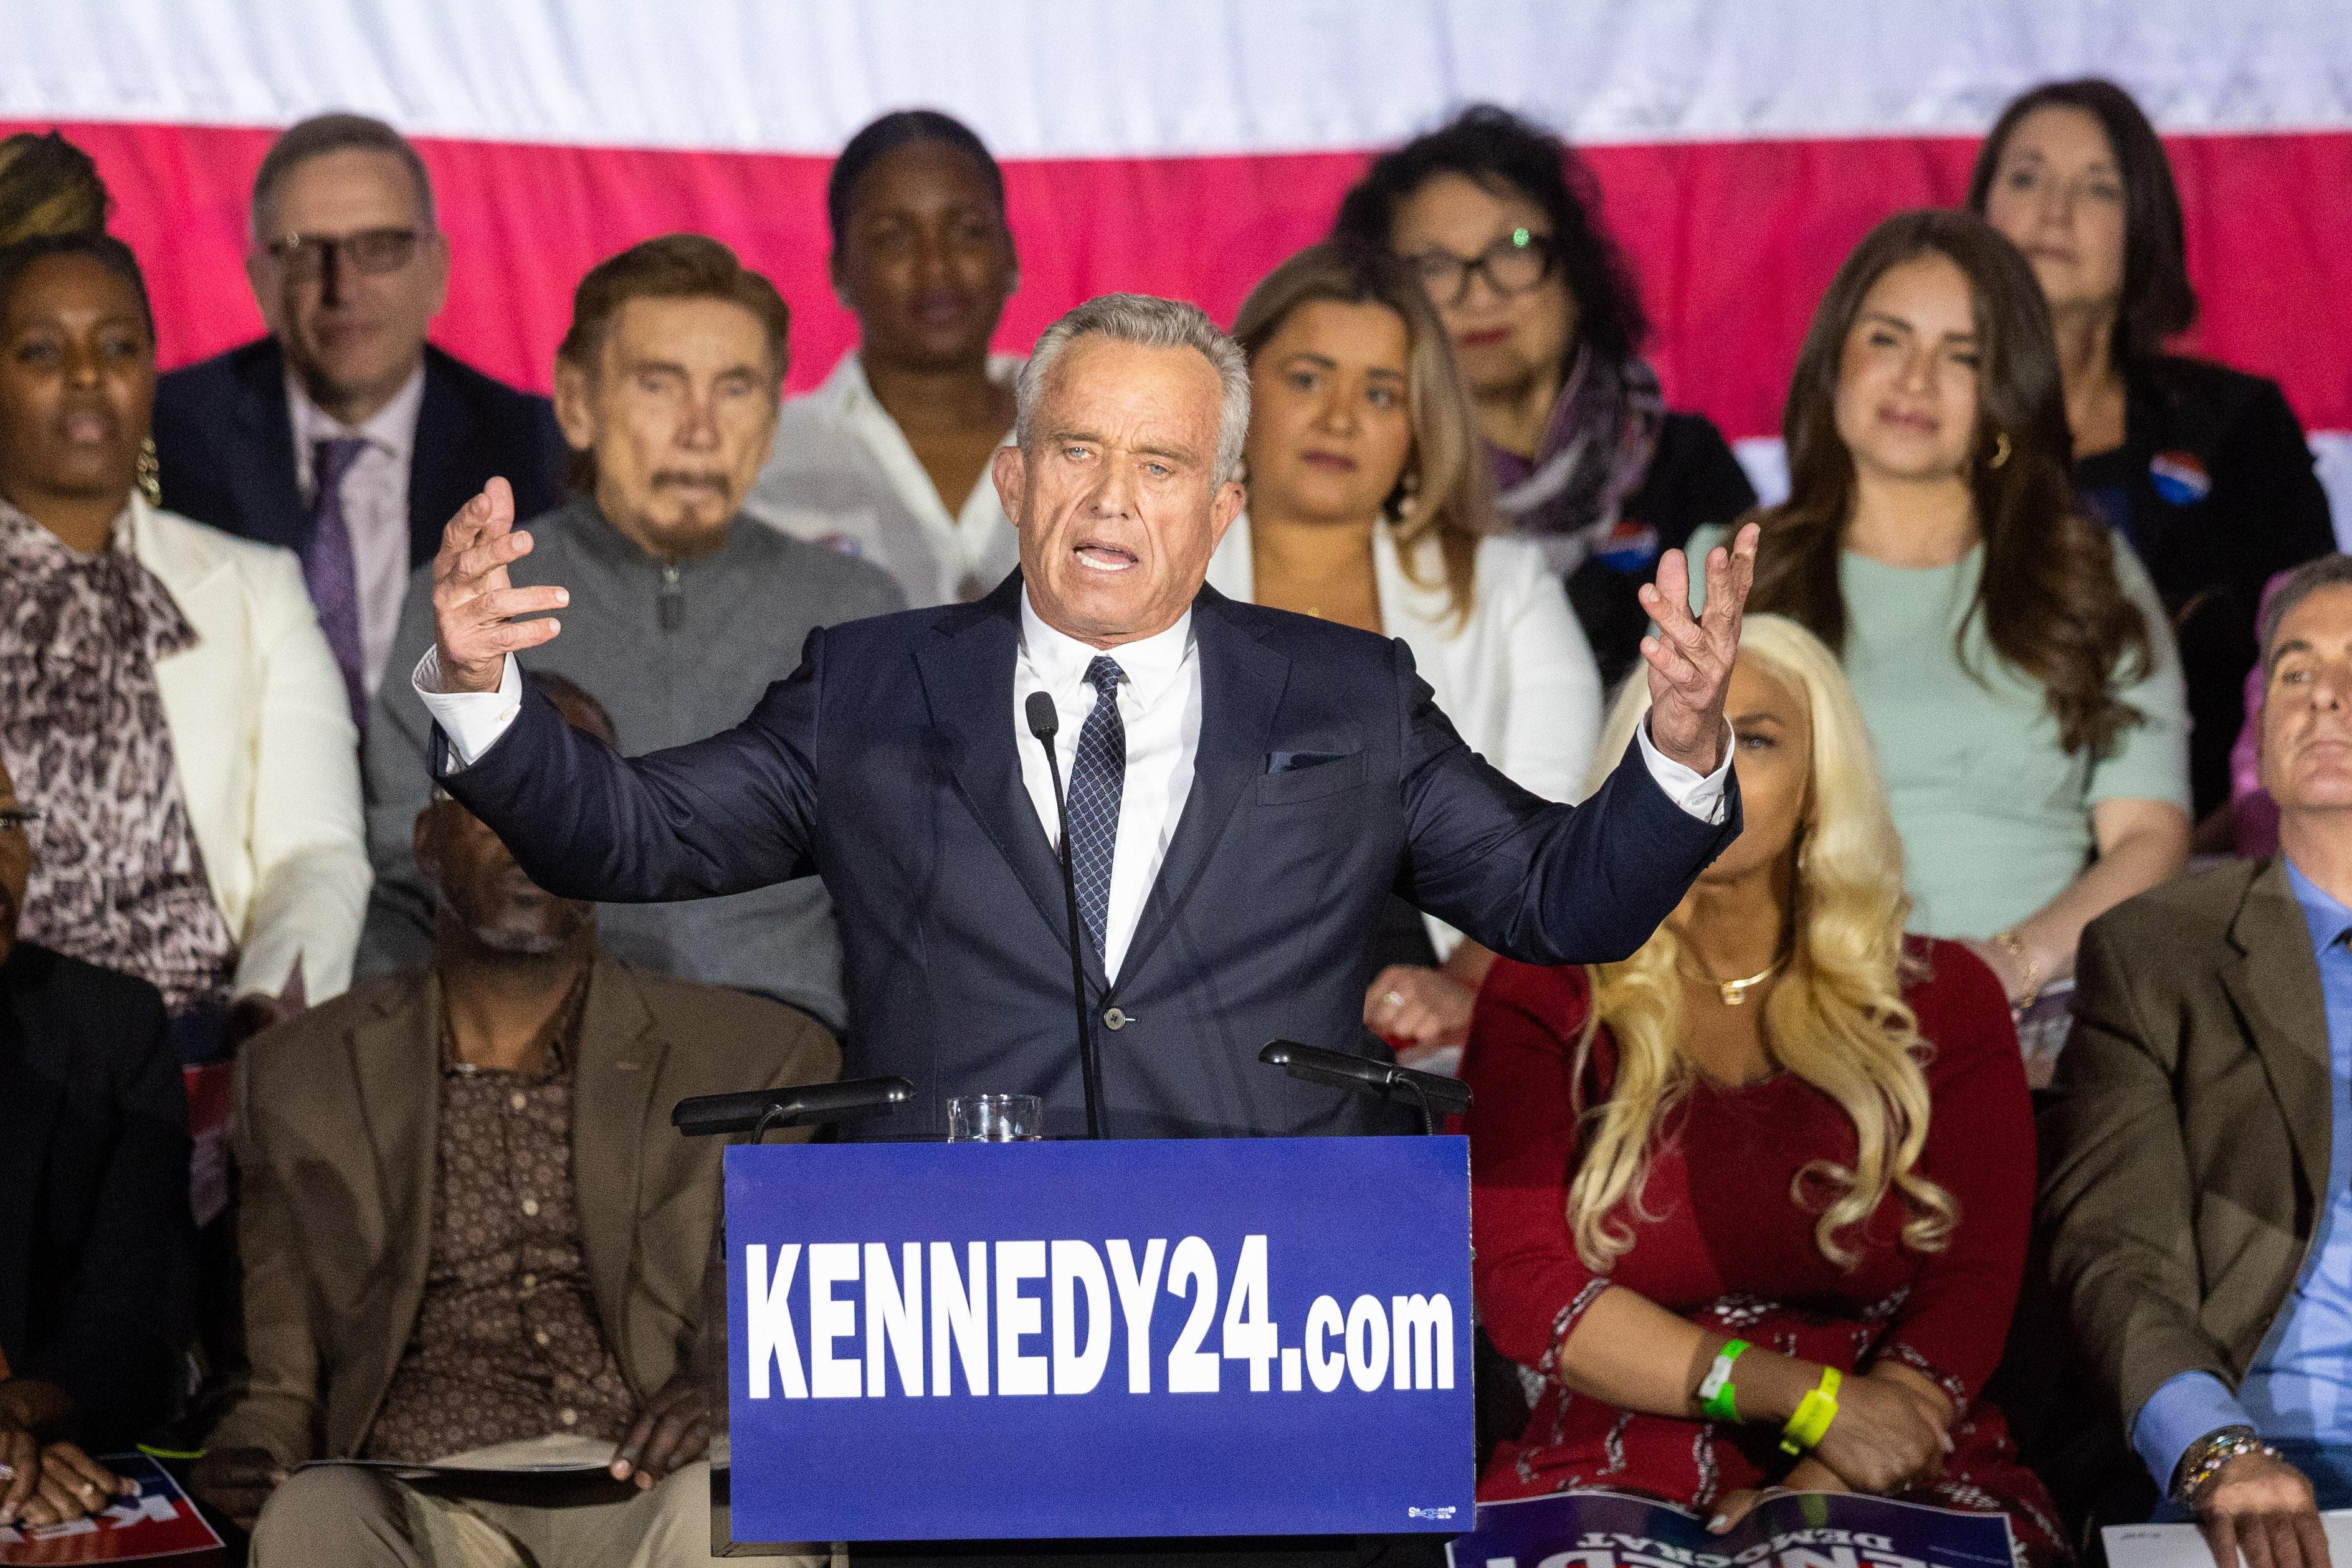 A man behind a podium with a sign that says "Kennedy 2024" stands before a large crowd with his hands raised. 